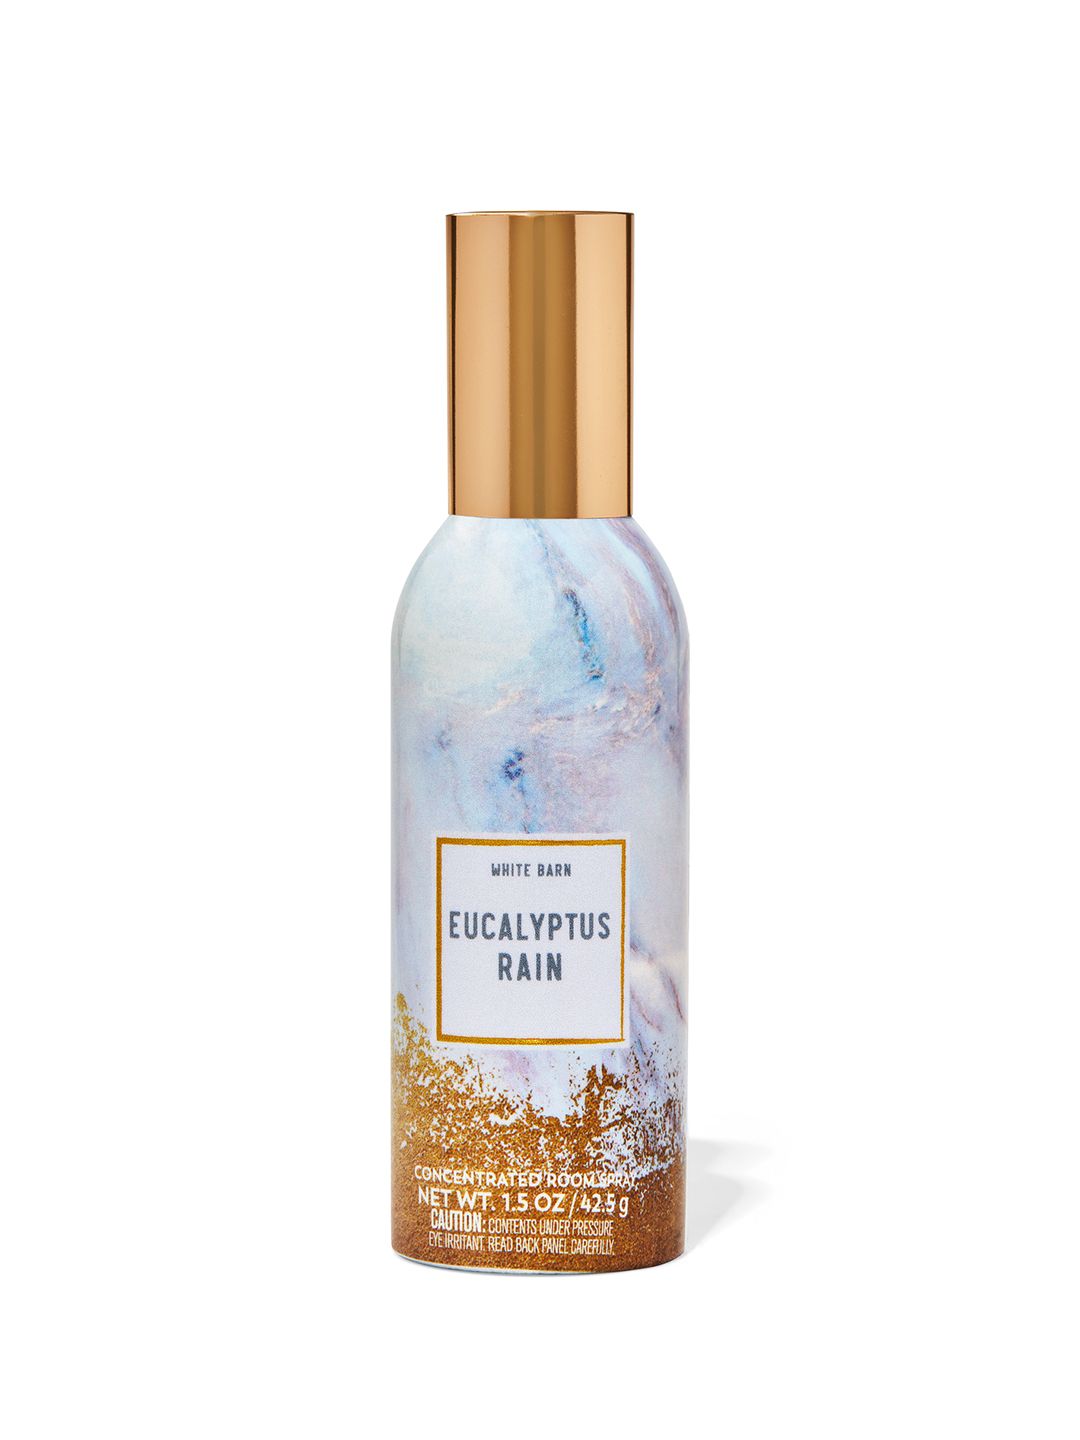 Bath & Body Works Eucalyptus Rain Concentrated Room Spray - 42.5g Price in India